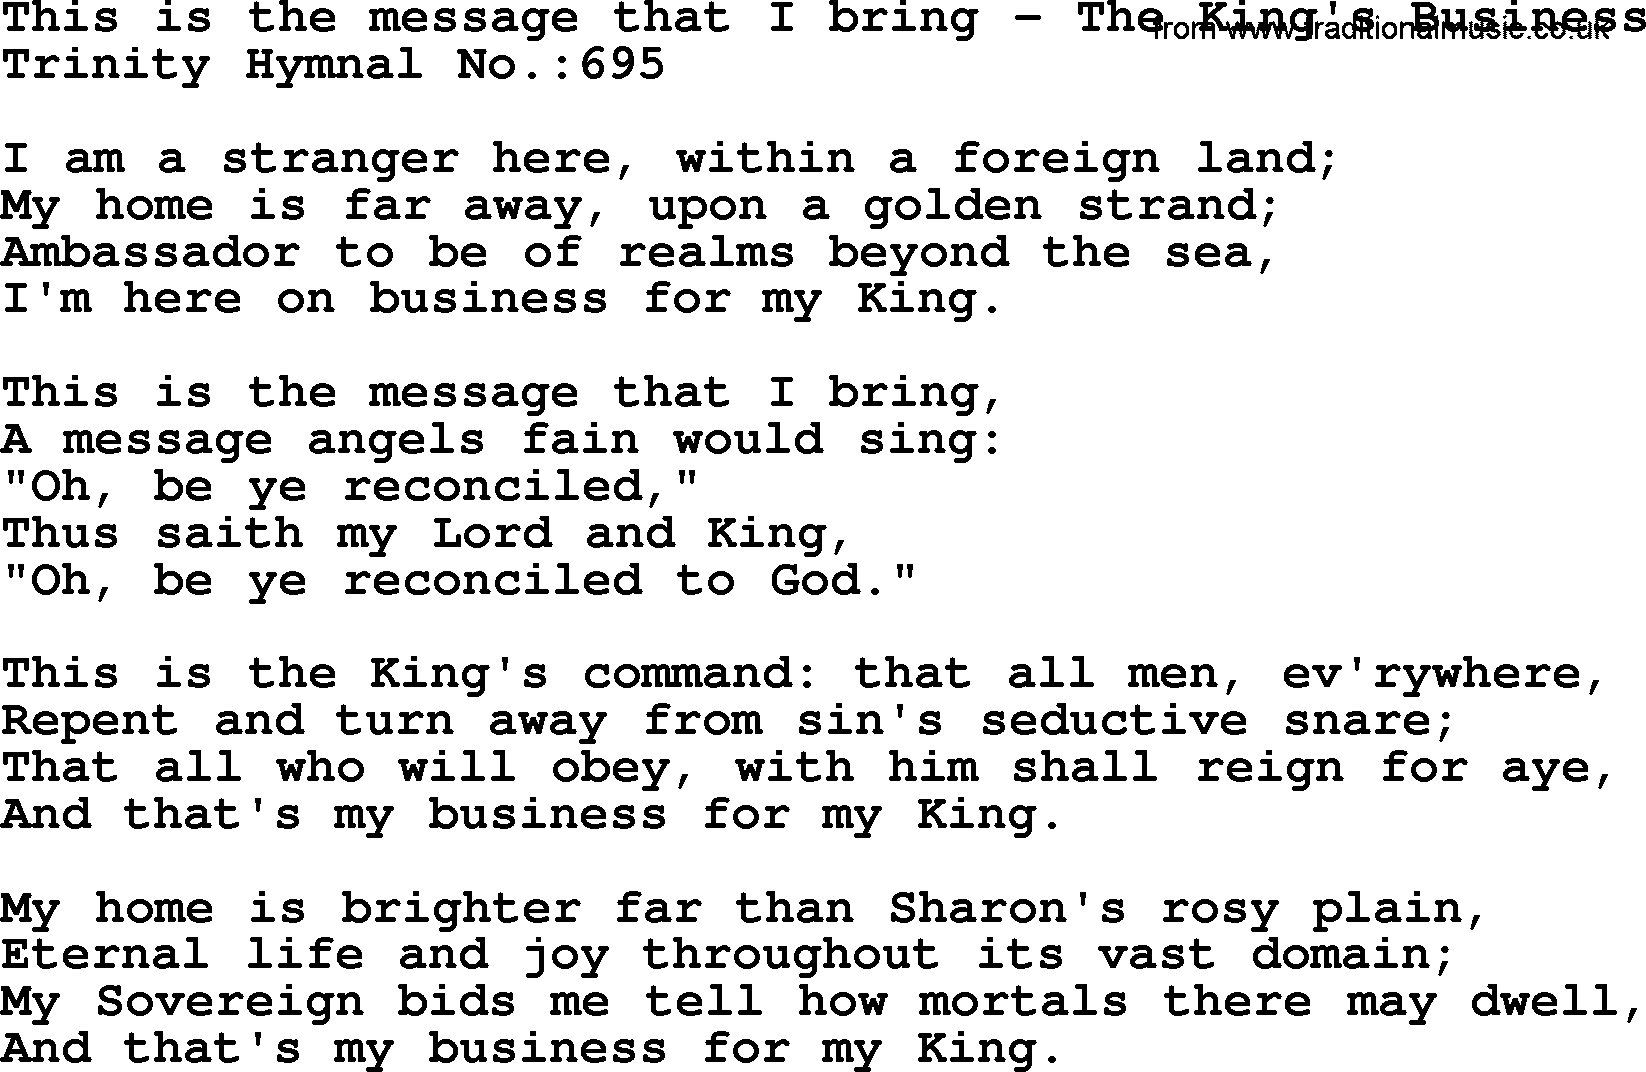 Trinity Hymnal Hymn: This Is The Message That I Bring--The King's Business, lyrics with midi music